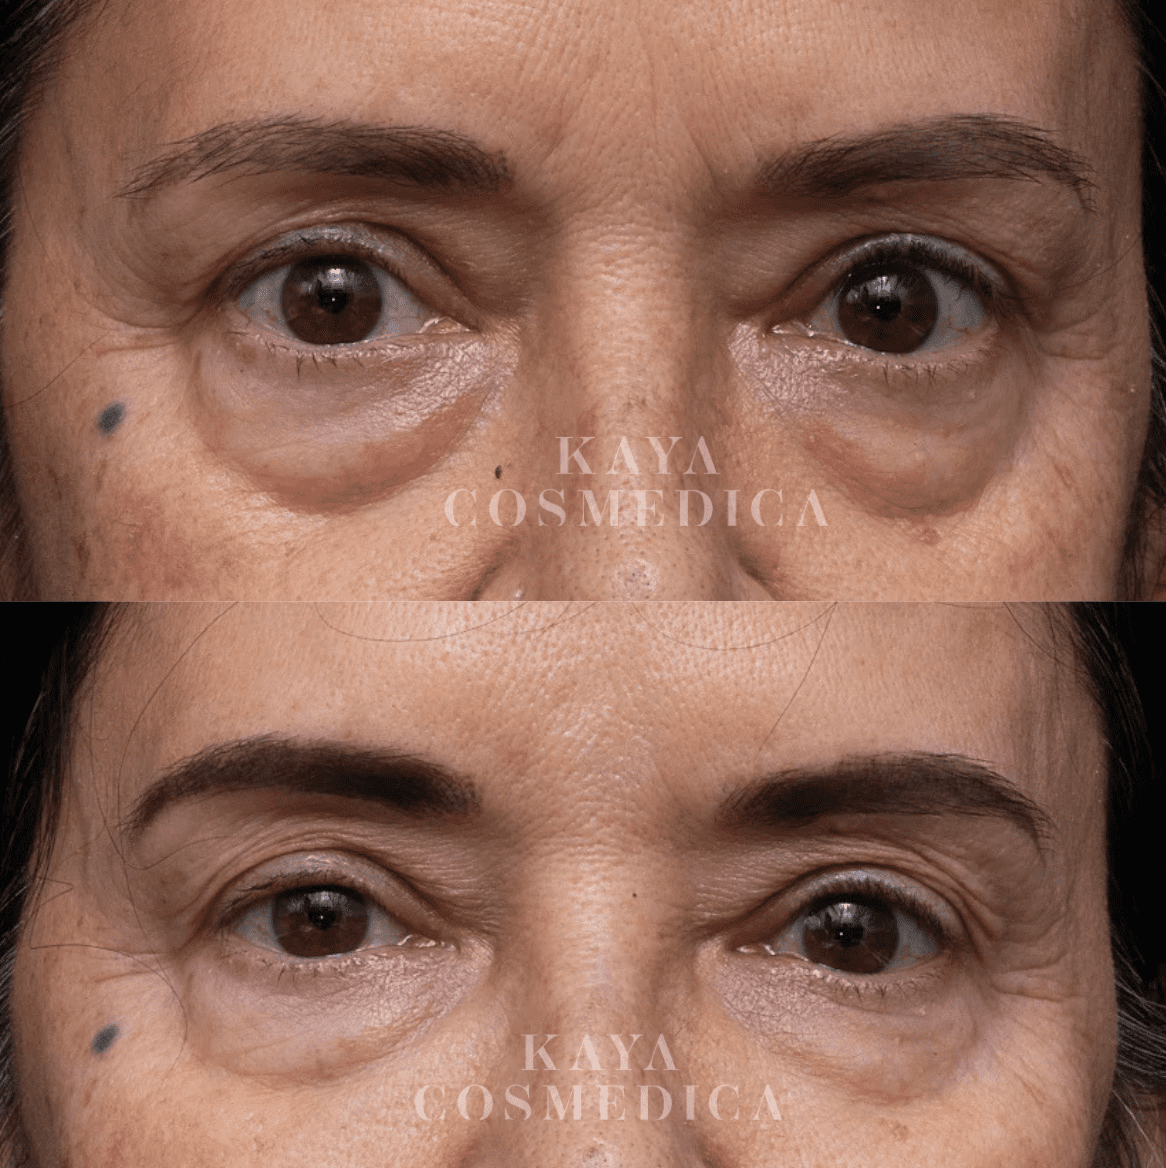 Close-up before and after comparison of a woman's eyes, showing reduced wrinkles and diminished dark circles in the lower image. The brand "Kaya Cosmedica" is visible on both images.